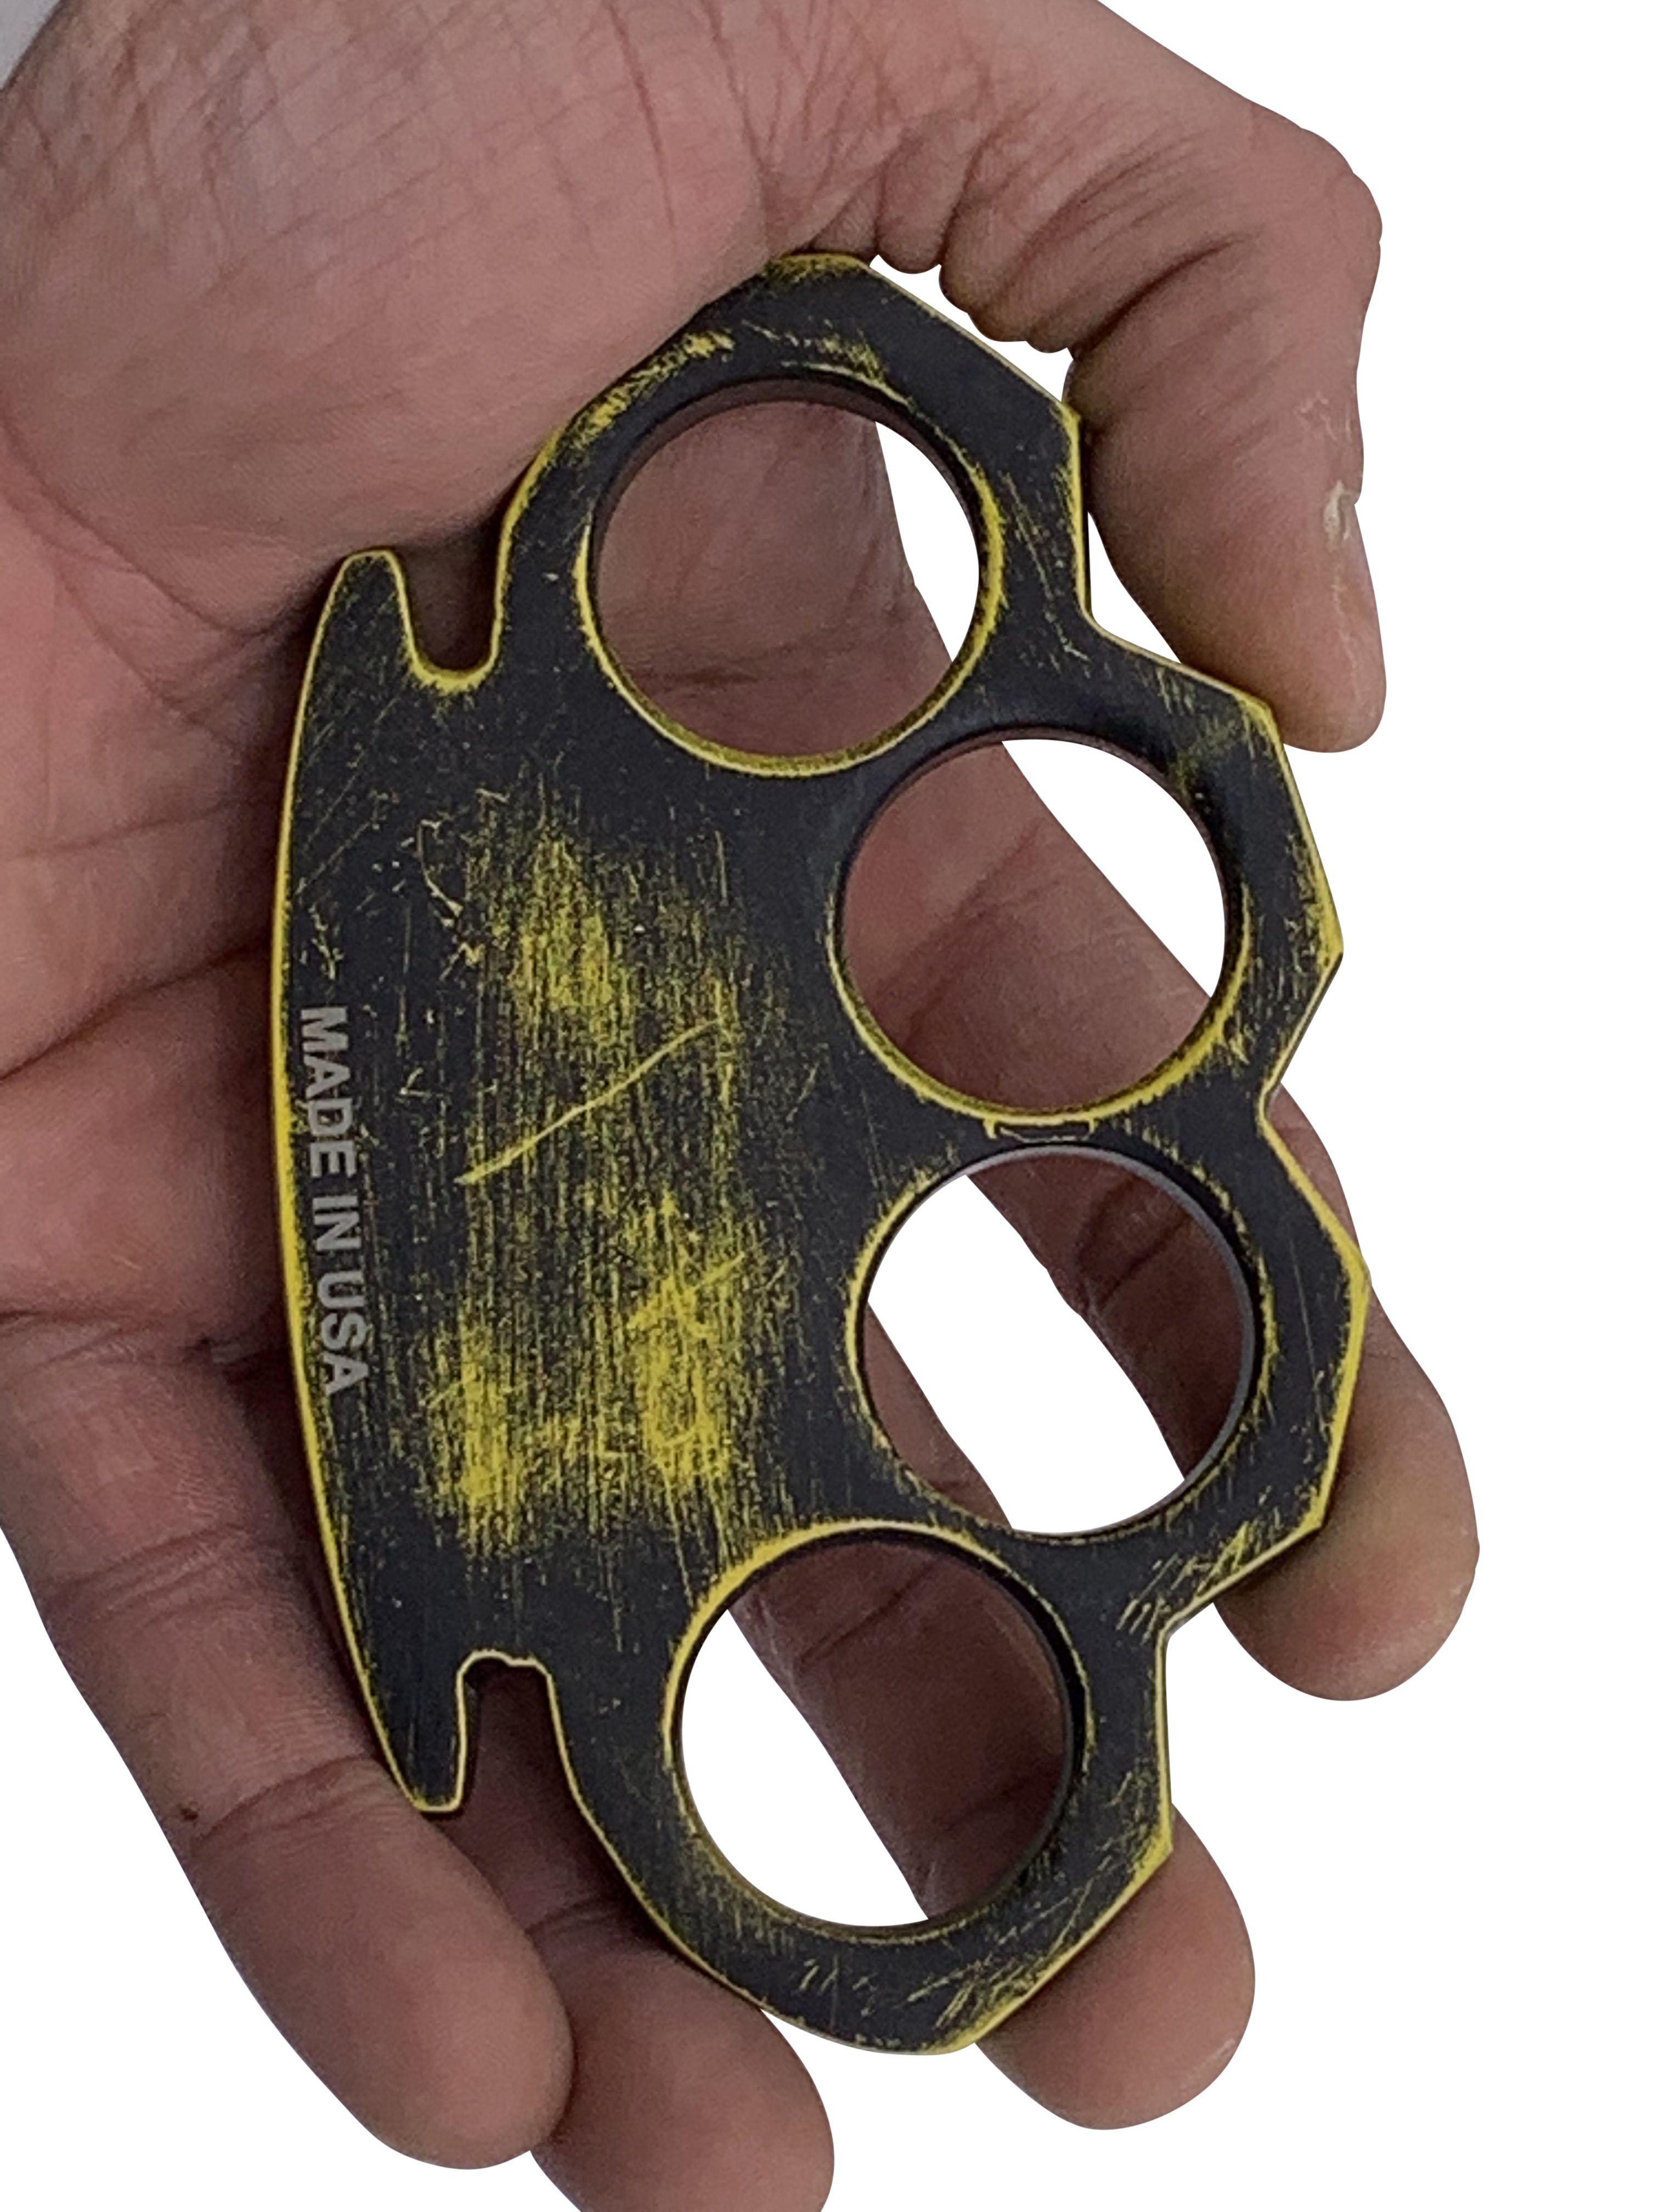 CI 300 P YL BK 1 Cerakote Made in USA Brass Knuckles Black and Yellow